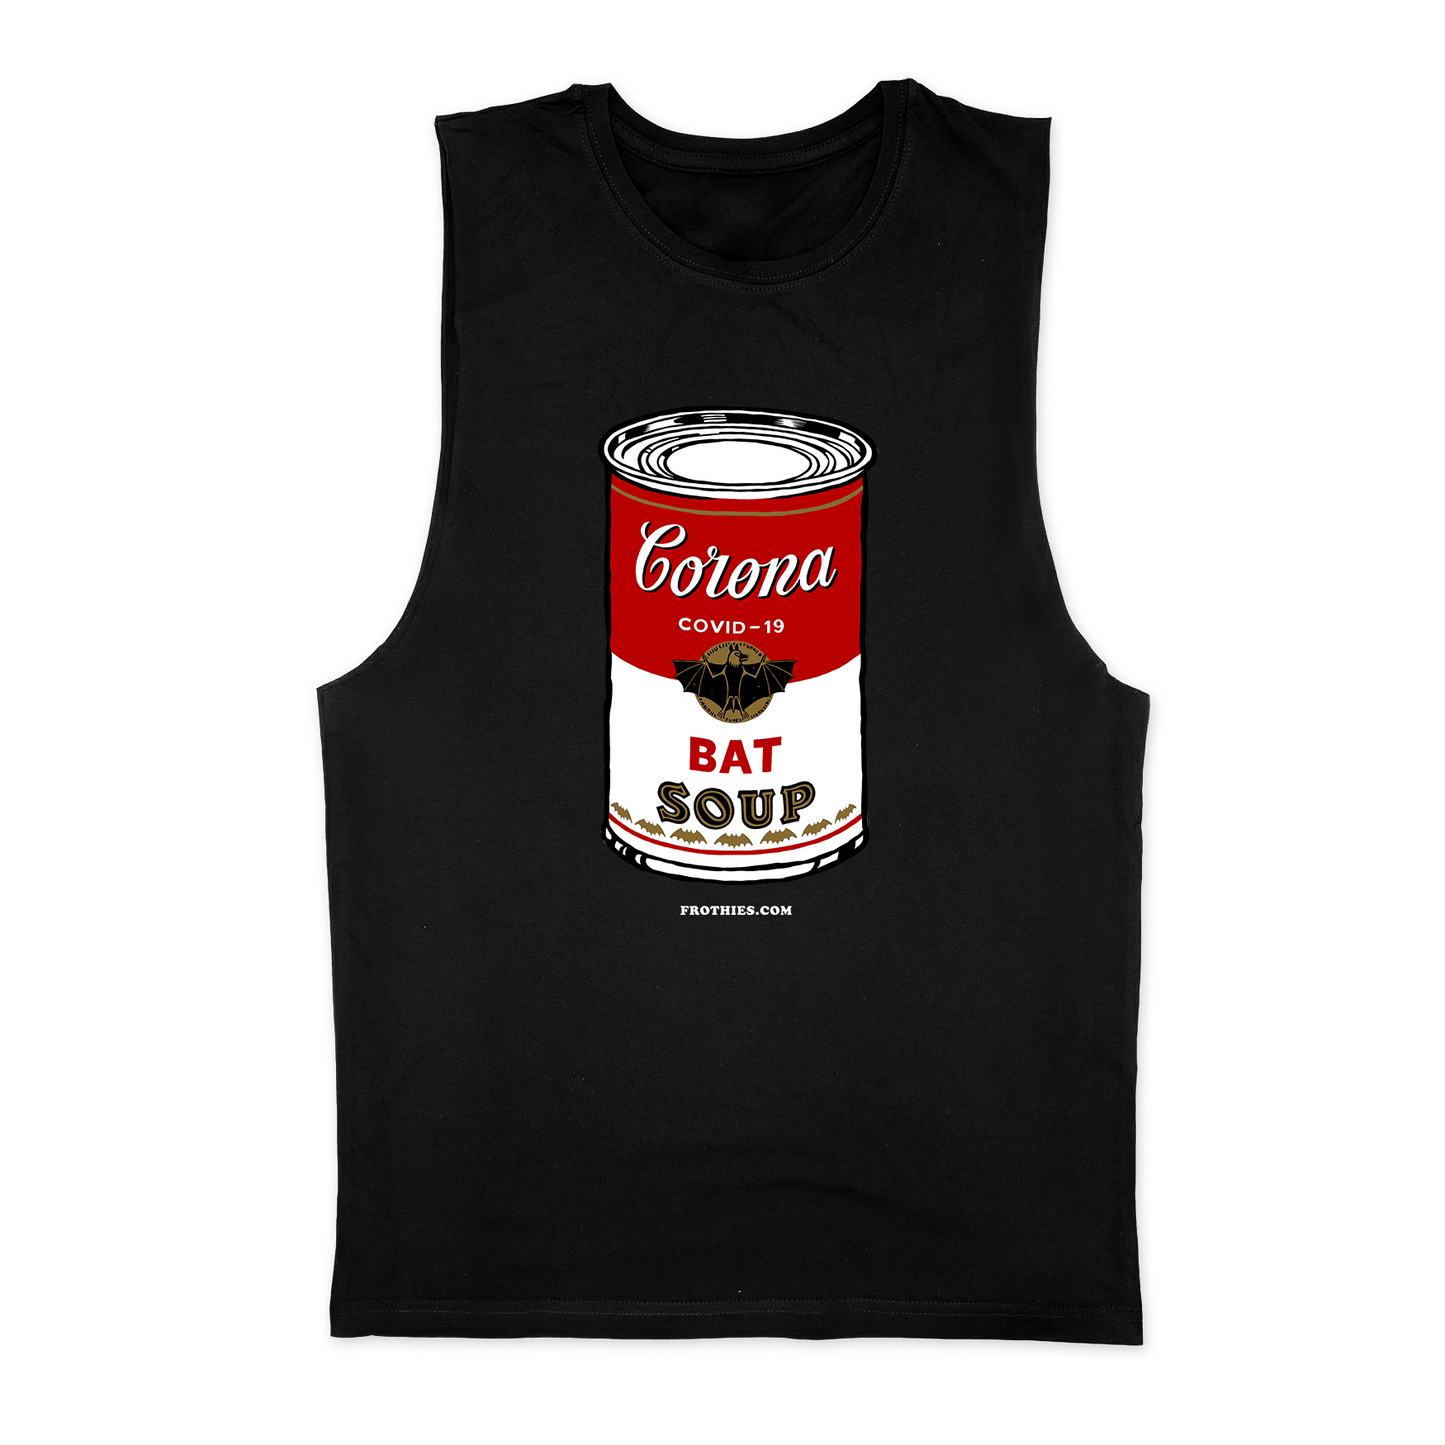 Bat Soup Chest Muscle Tee T-Shirt Frothies